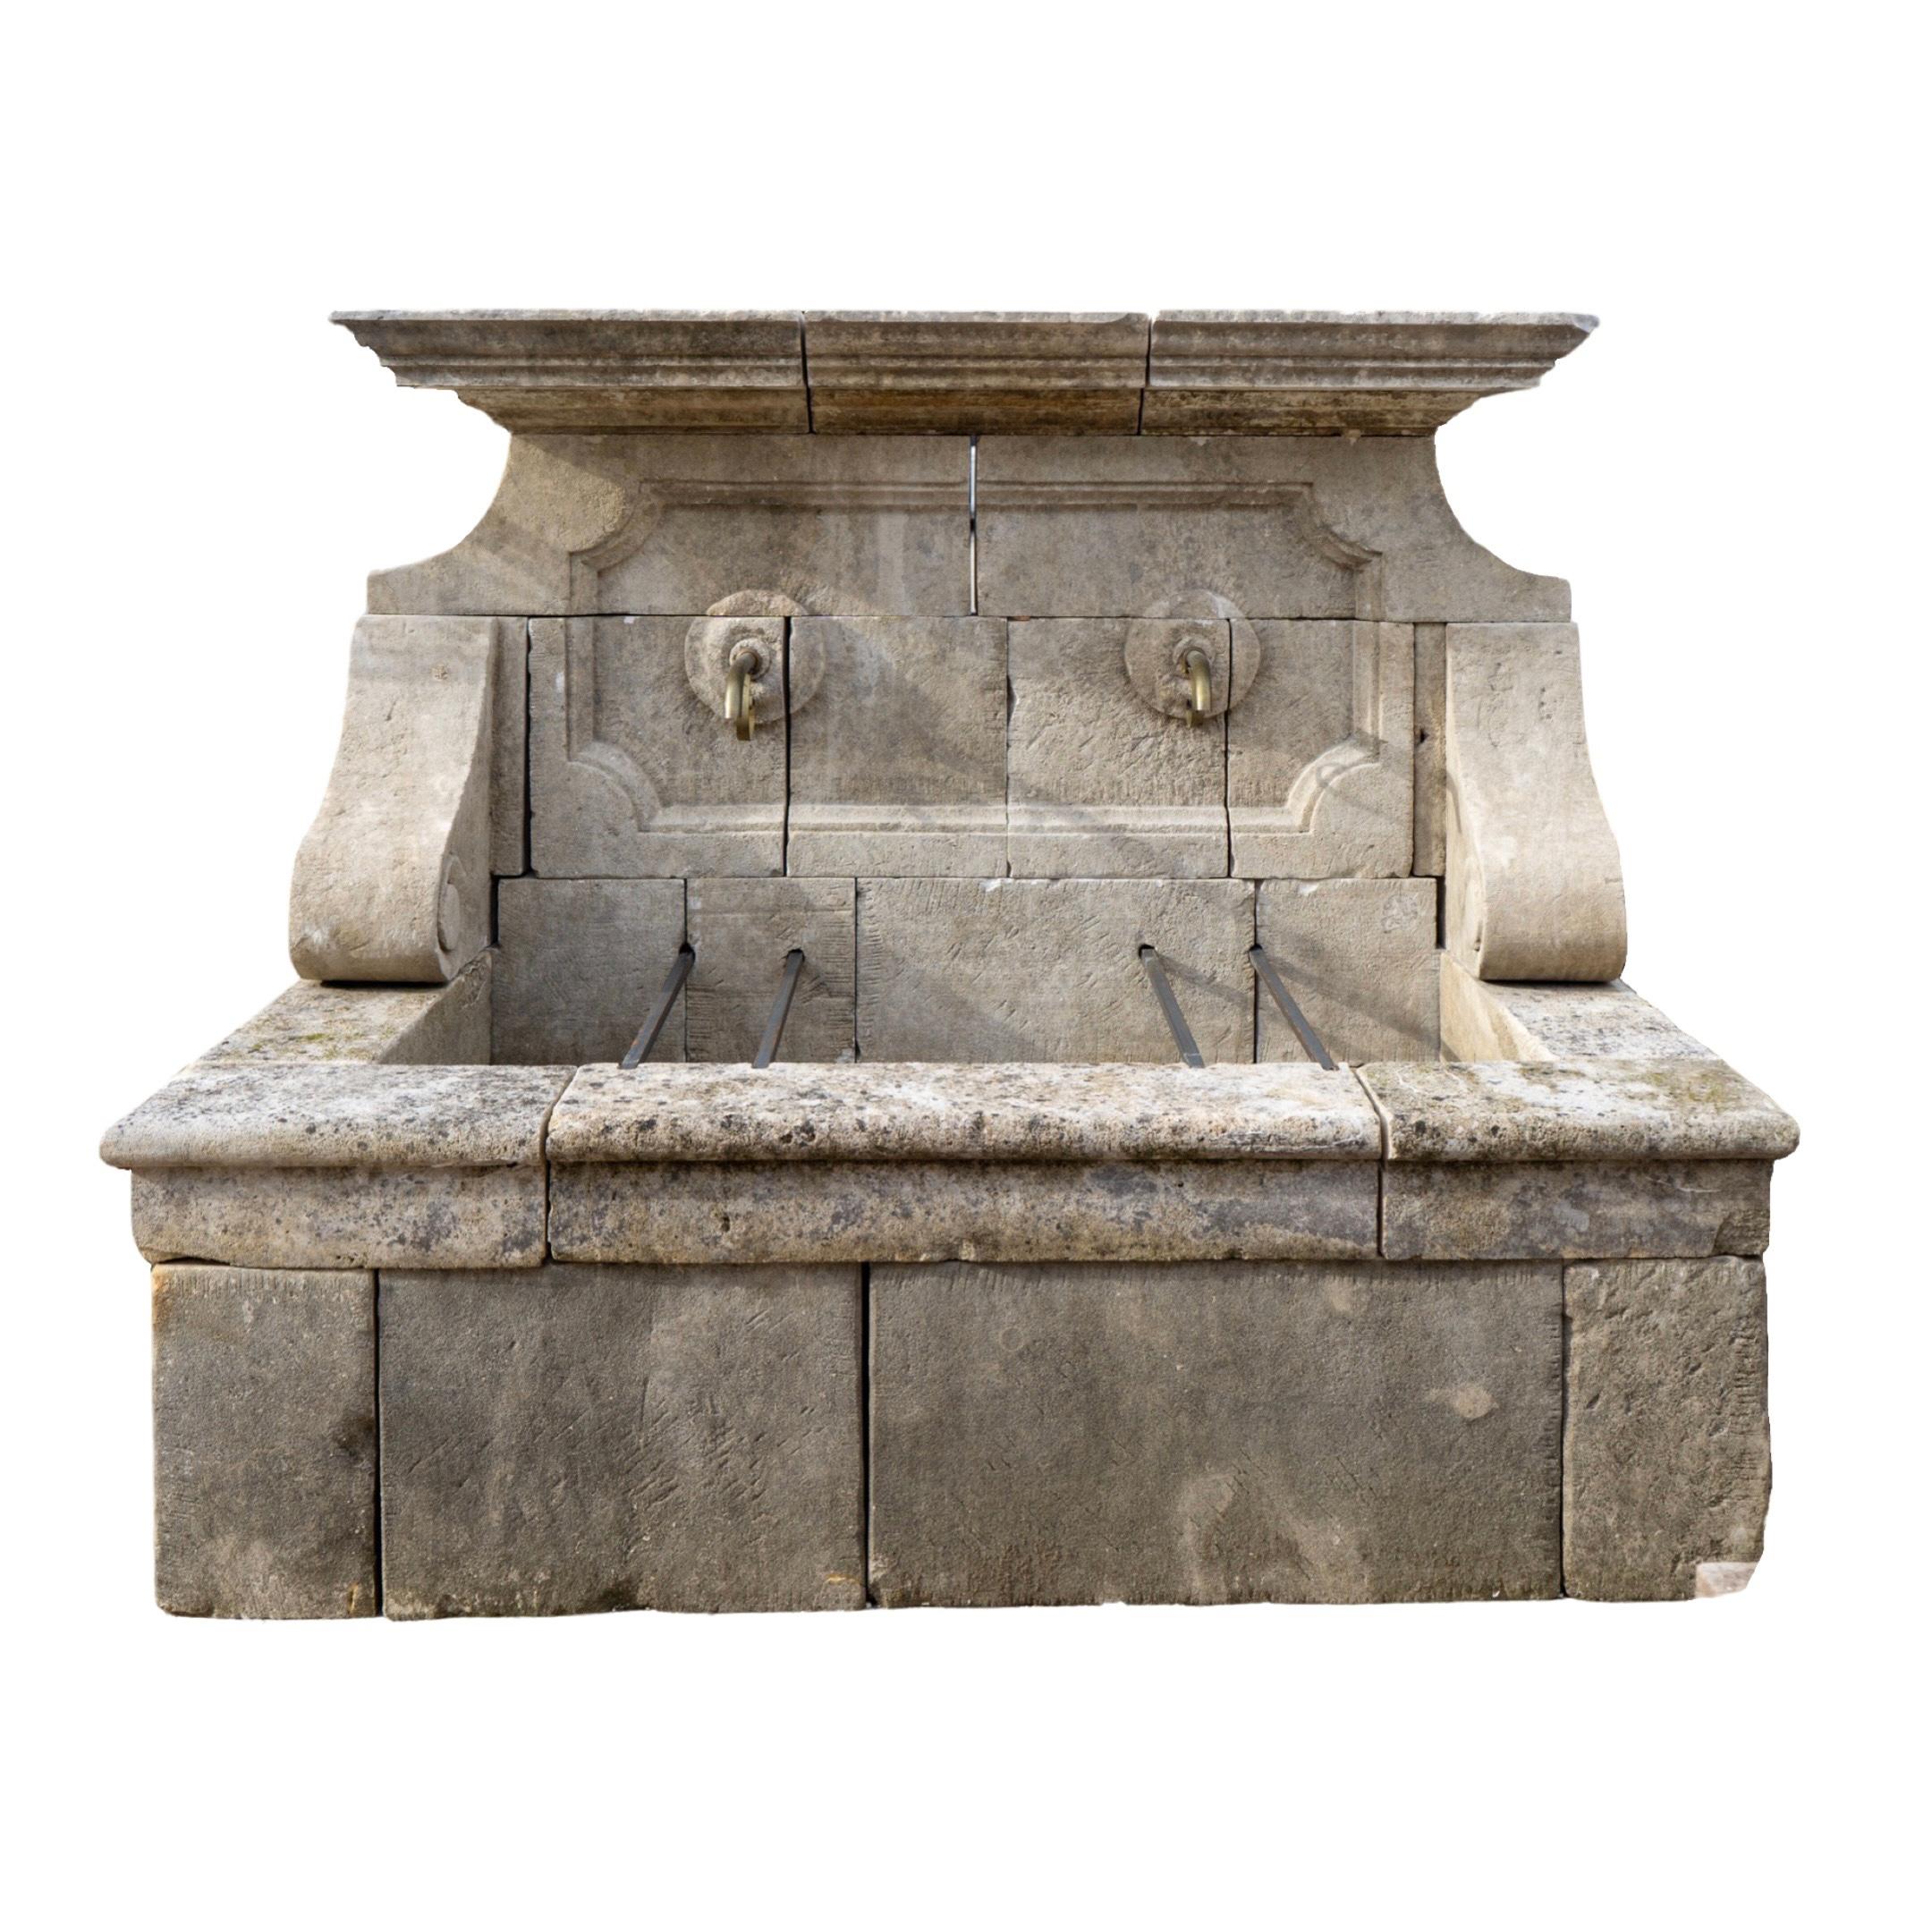 This French limestone wall fountain from the 1880s adds a touch of elegance and sophistication to any outdoor space. With a wide rectangular front basin and pre-drilled water holes for efficient drainage and overflow, this fountain is both beautiful